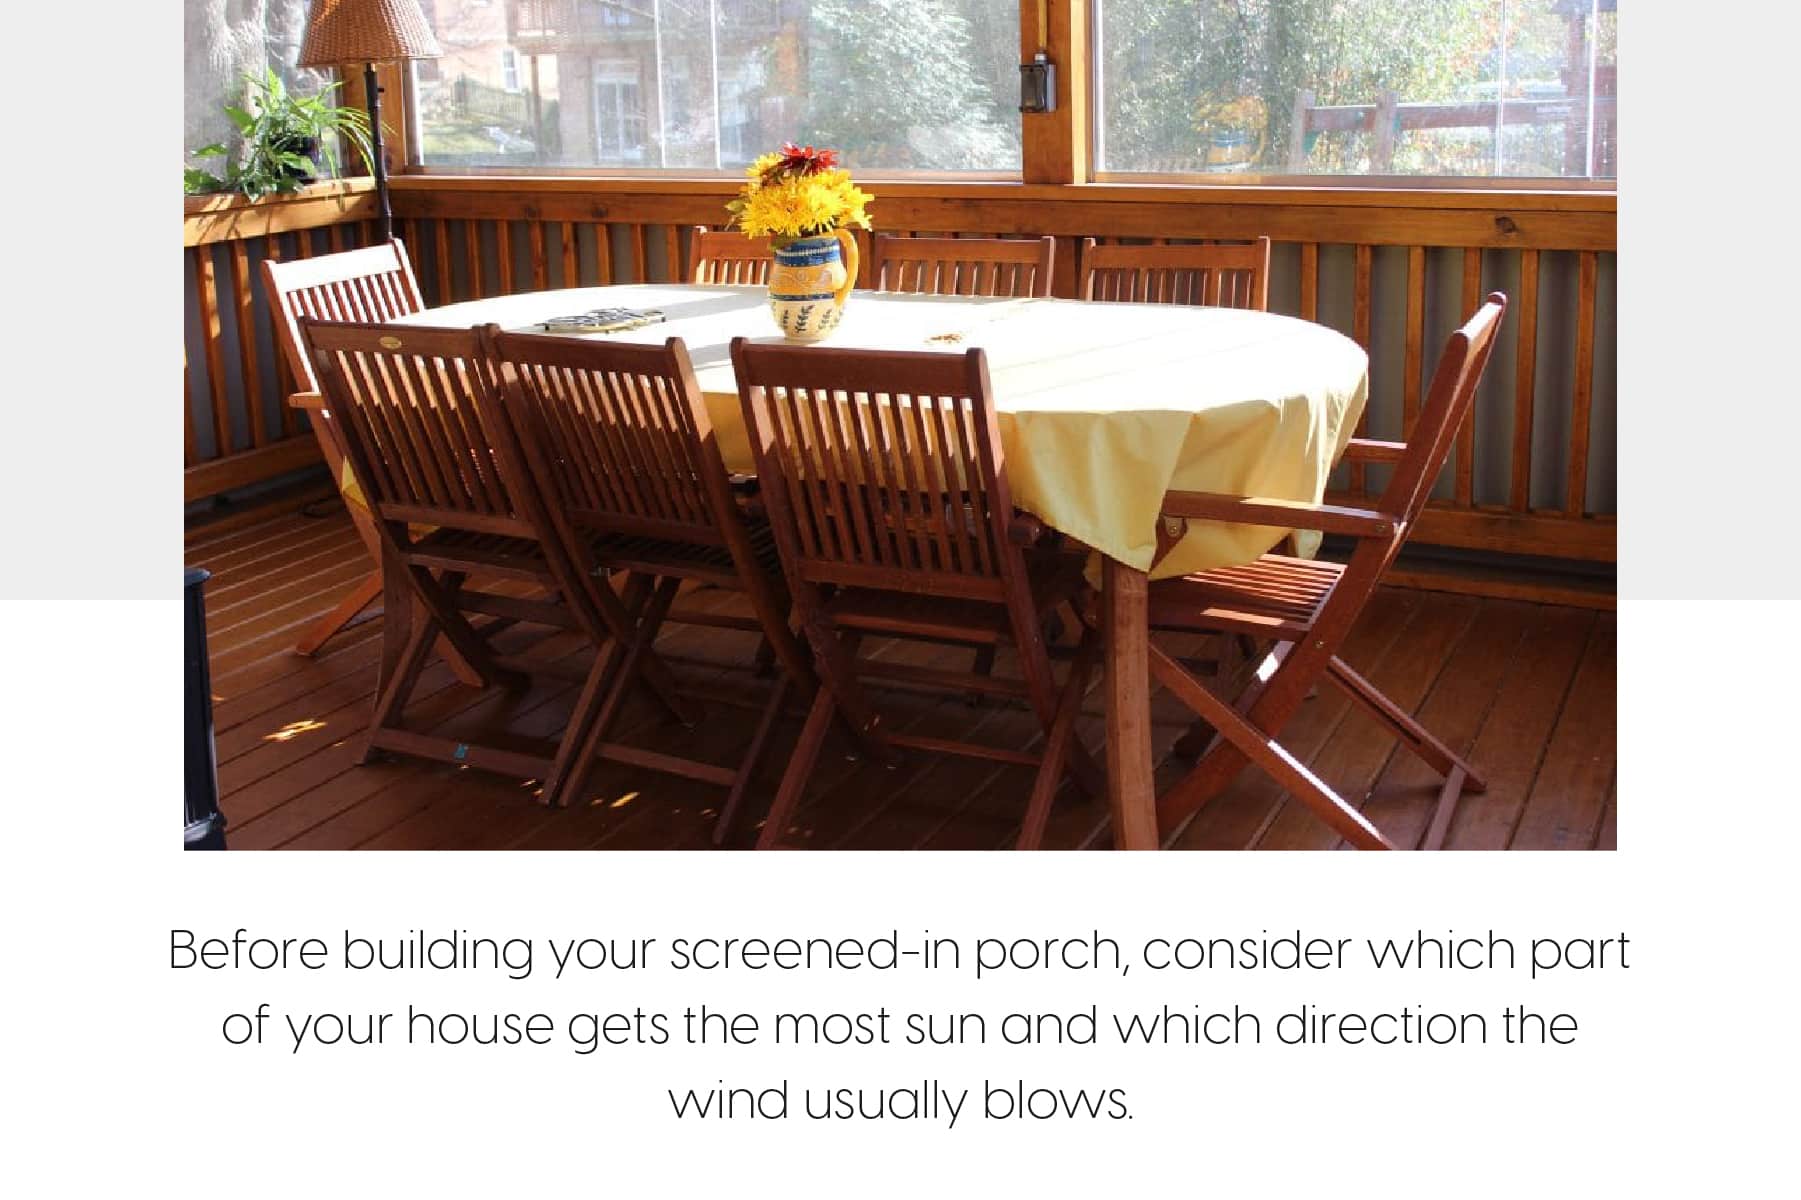 before building your screened-in porch